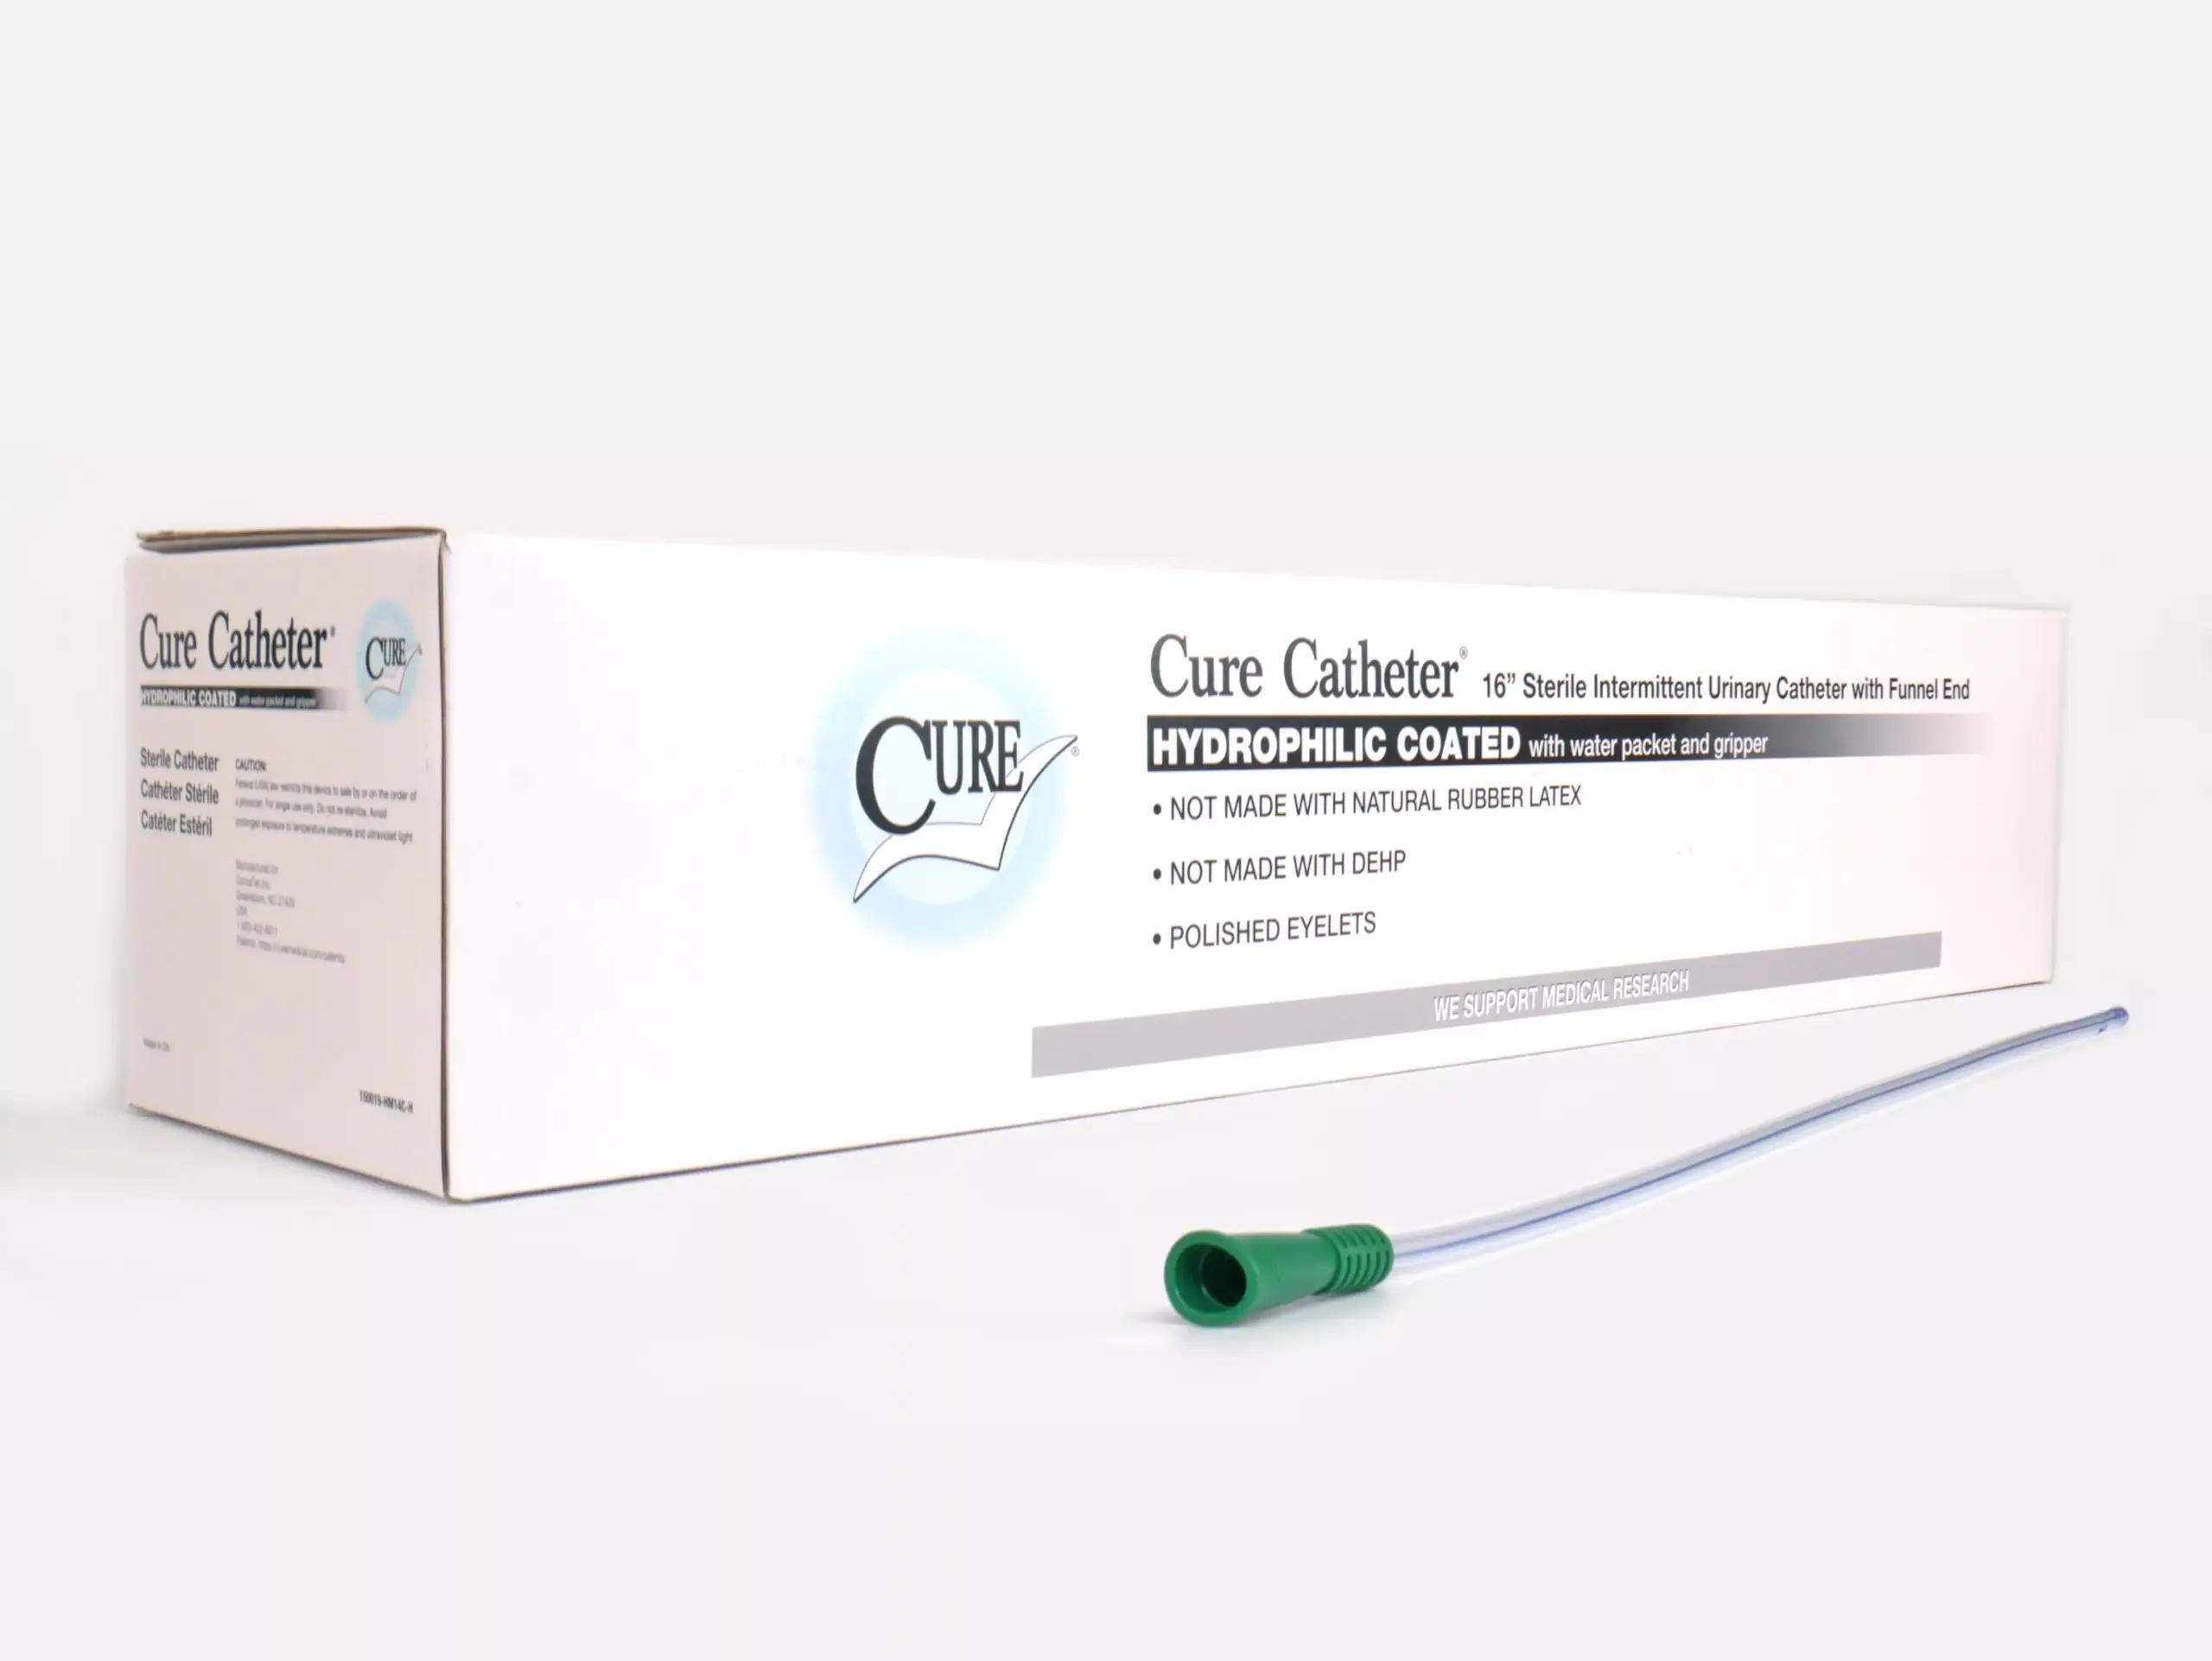 Image showing a RA Fischer Co. Cure brand catheter box on a white background. In the foreground, there is a catheter with a green grip. The box is labeled 'Cure Catheter. 16" Sterile Intermittent Urinary Catheter with Funnel End. Hydrophilic Coated with water packet and gripper. Not made with natural rubber latex. Not made with DEHP. Polished eyelets. We support medical research.'